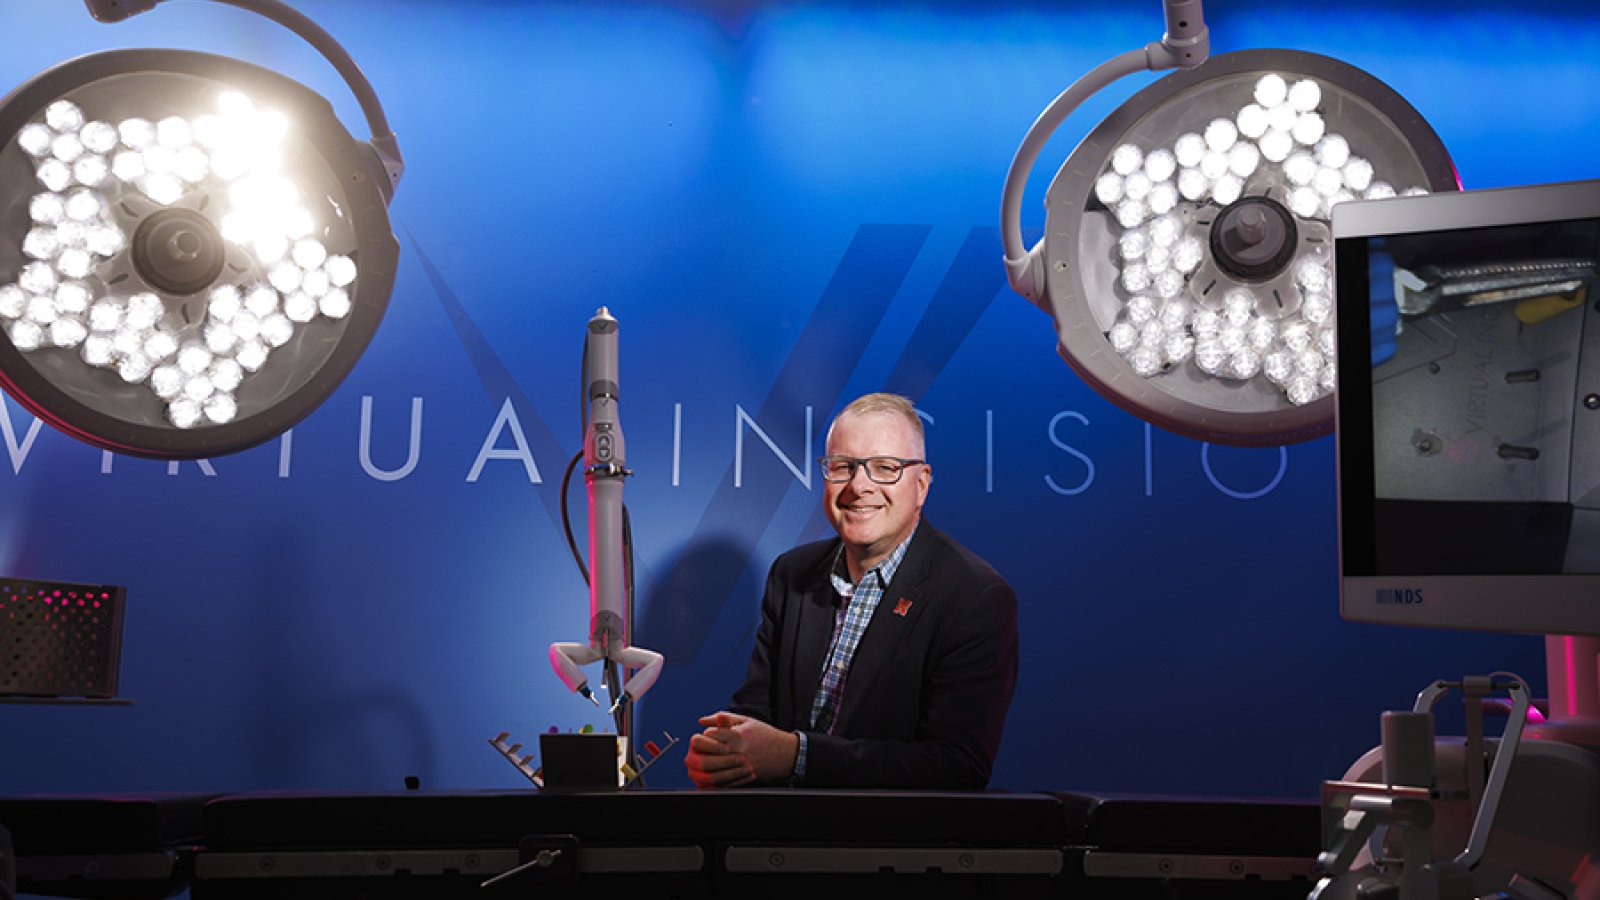 Invented by Nebraska Engineering professor Shane Farritor and others, a miniaturized surgical robot was launched into space Jan. 30 aboard a SpaceX Falcon 9 rocket, headed for the International Space Station where its remote capabilities will be tested. (Craig Chandler / University Communication & Marketing)